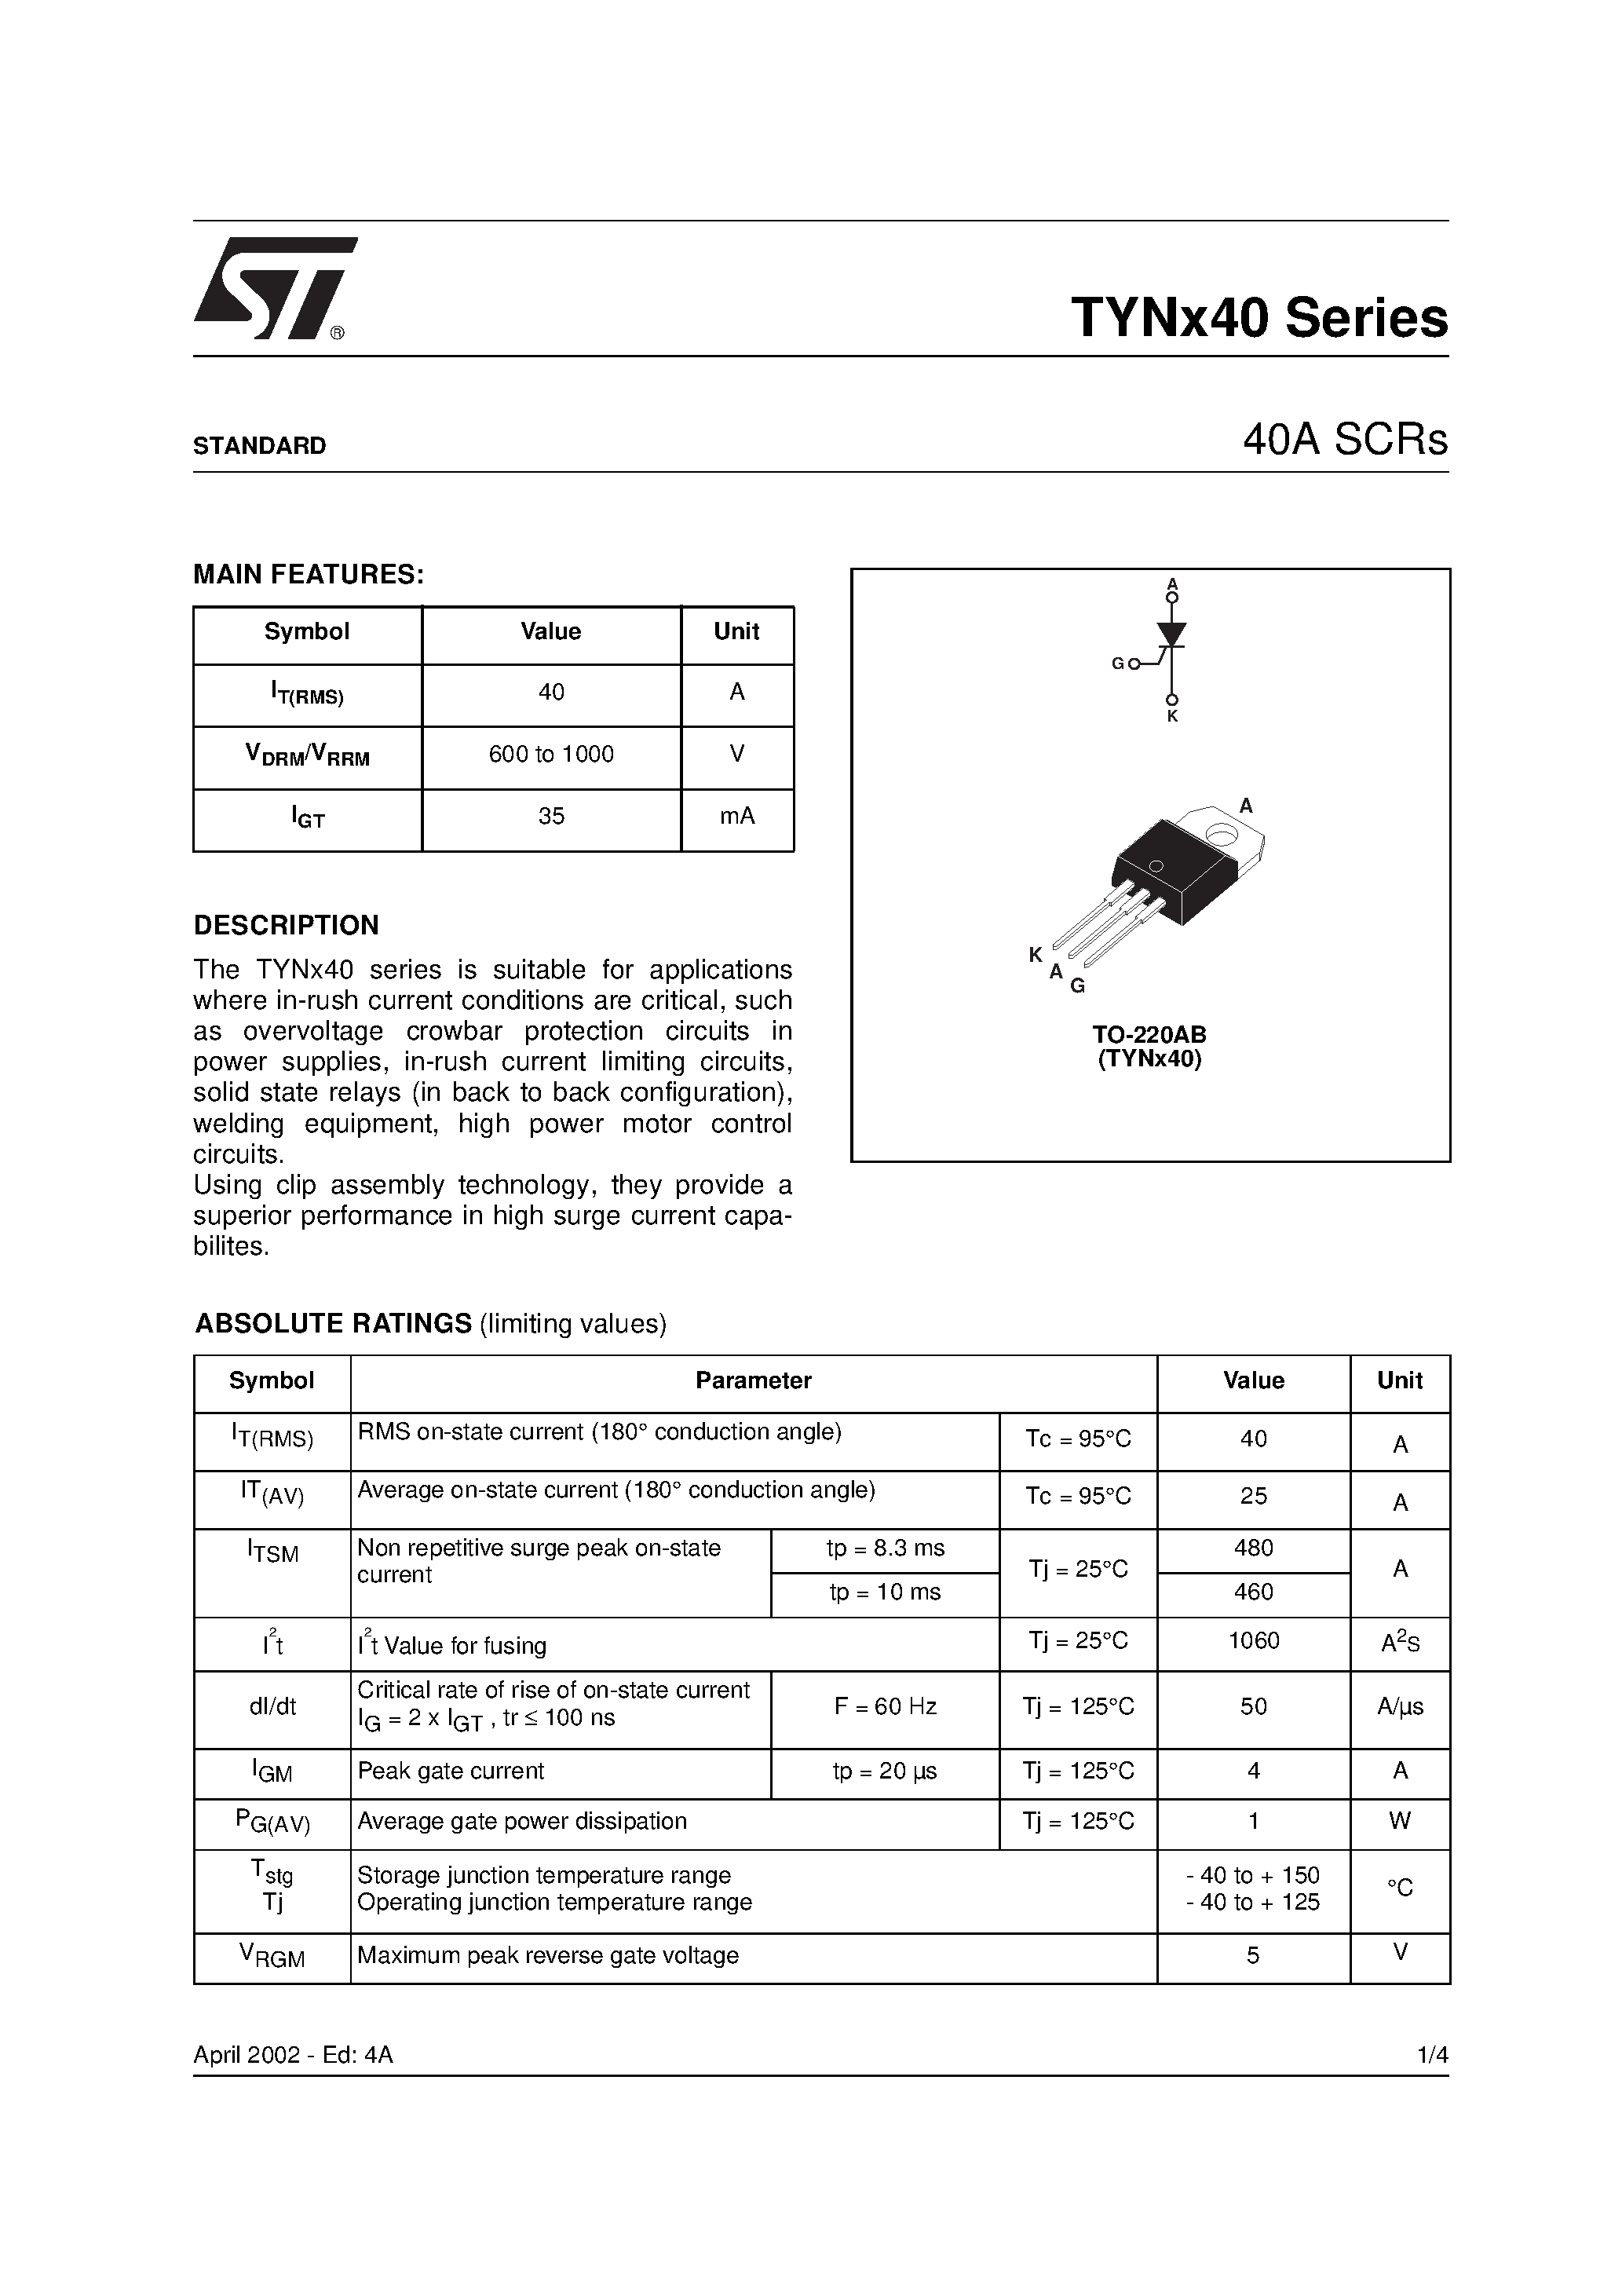 Datasheet TYNx40RG - 40A SCRs page 1